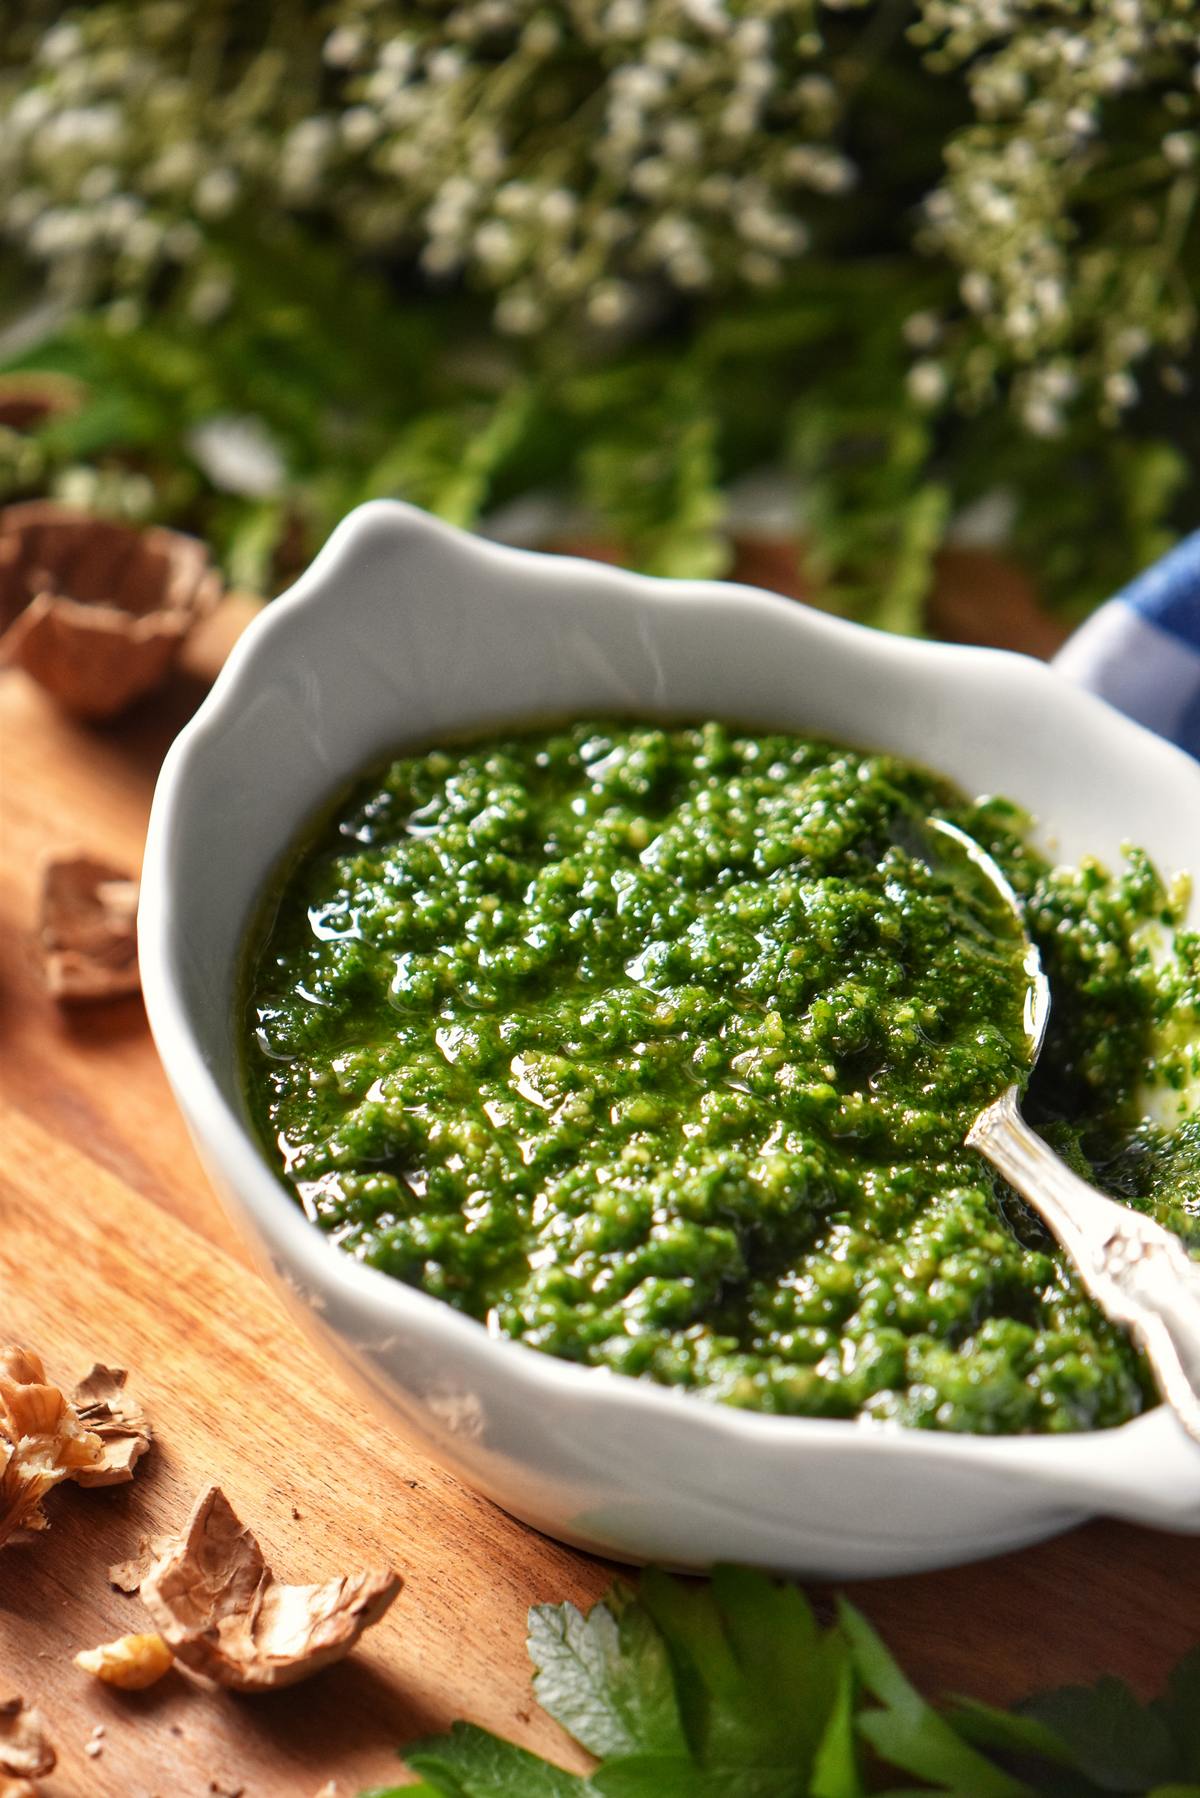 A spoon dipped into a white bowl of pesto made with parsley.